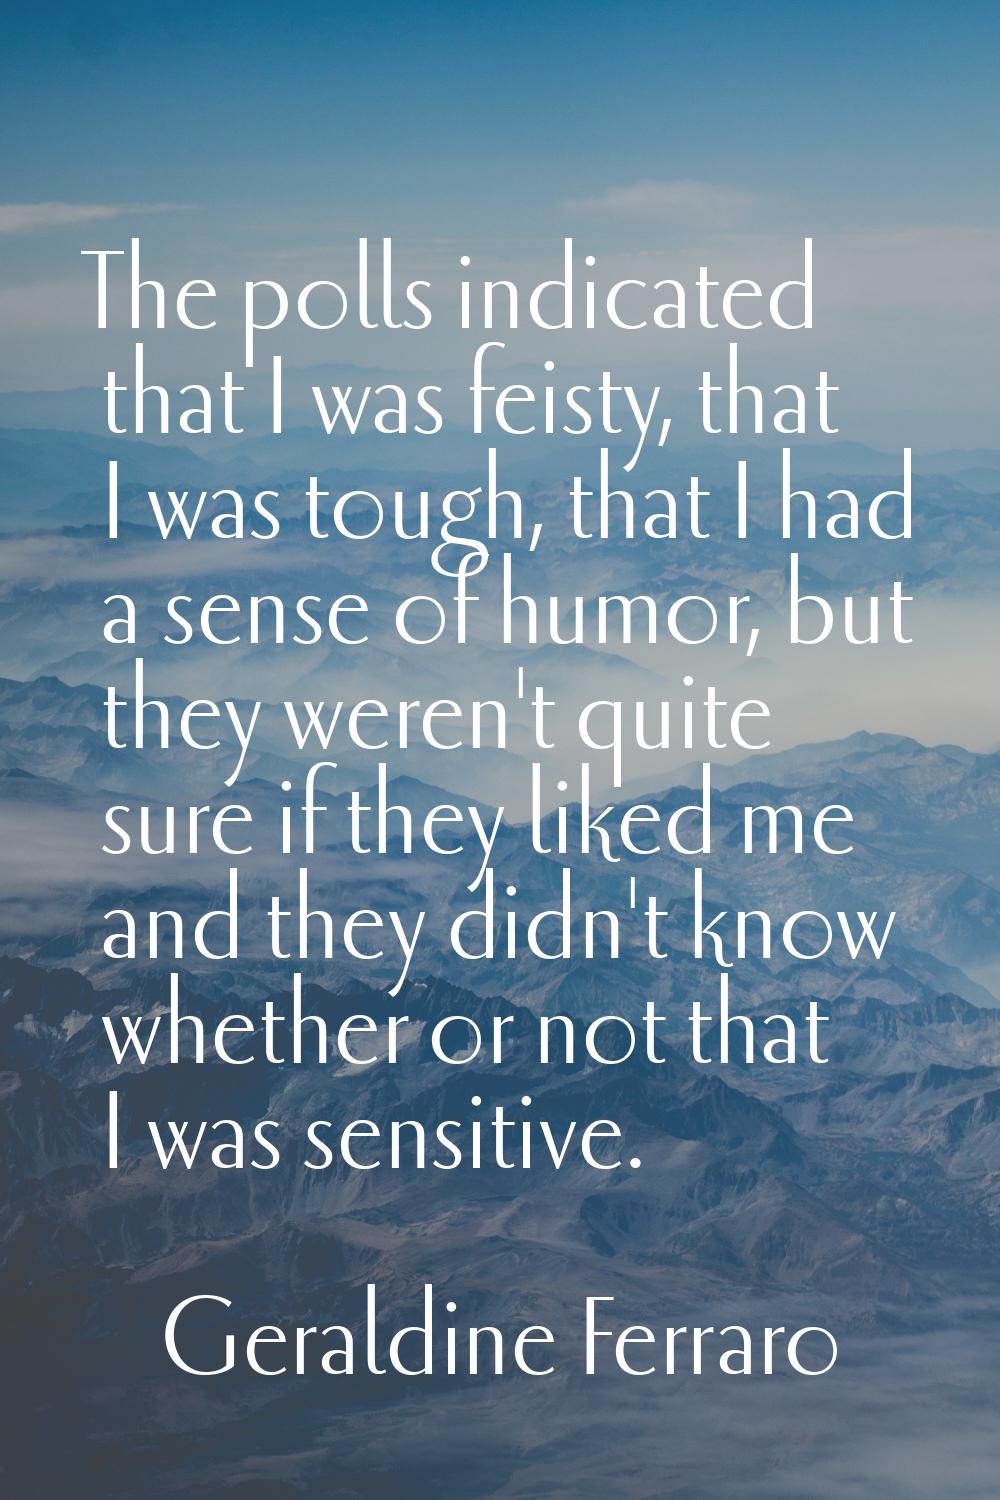 The polls indicated that I was feisty, that I was tough, that I had a sense of humor, but they were